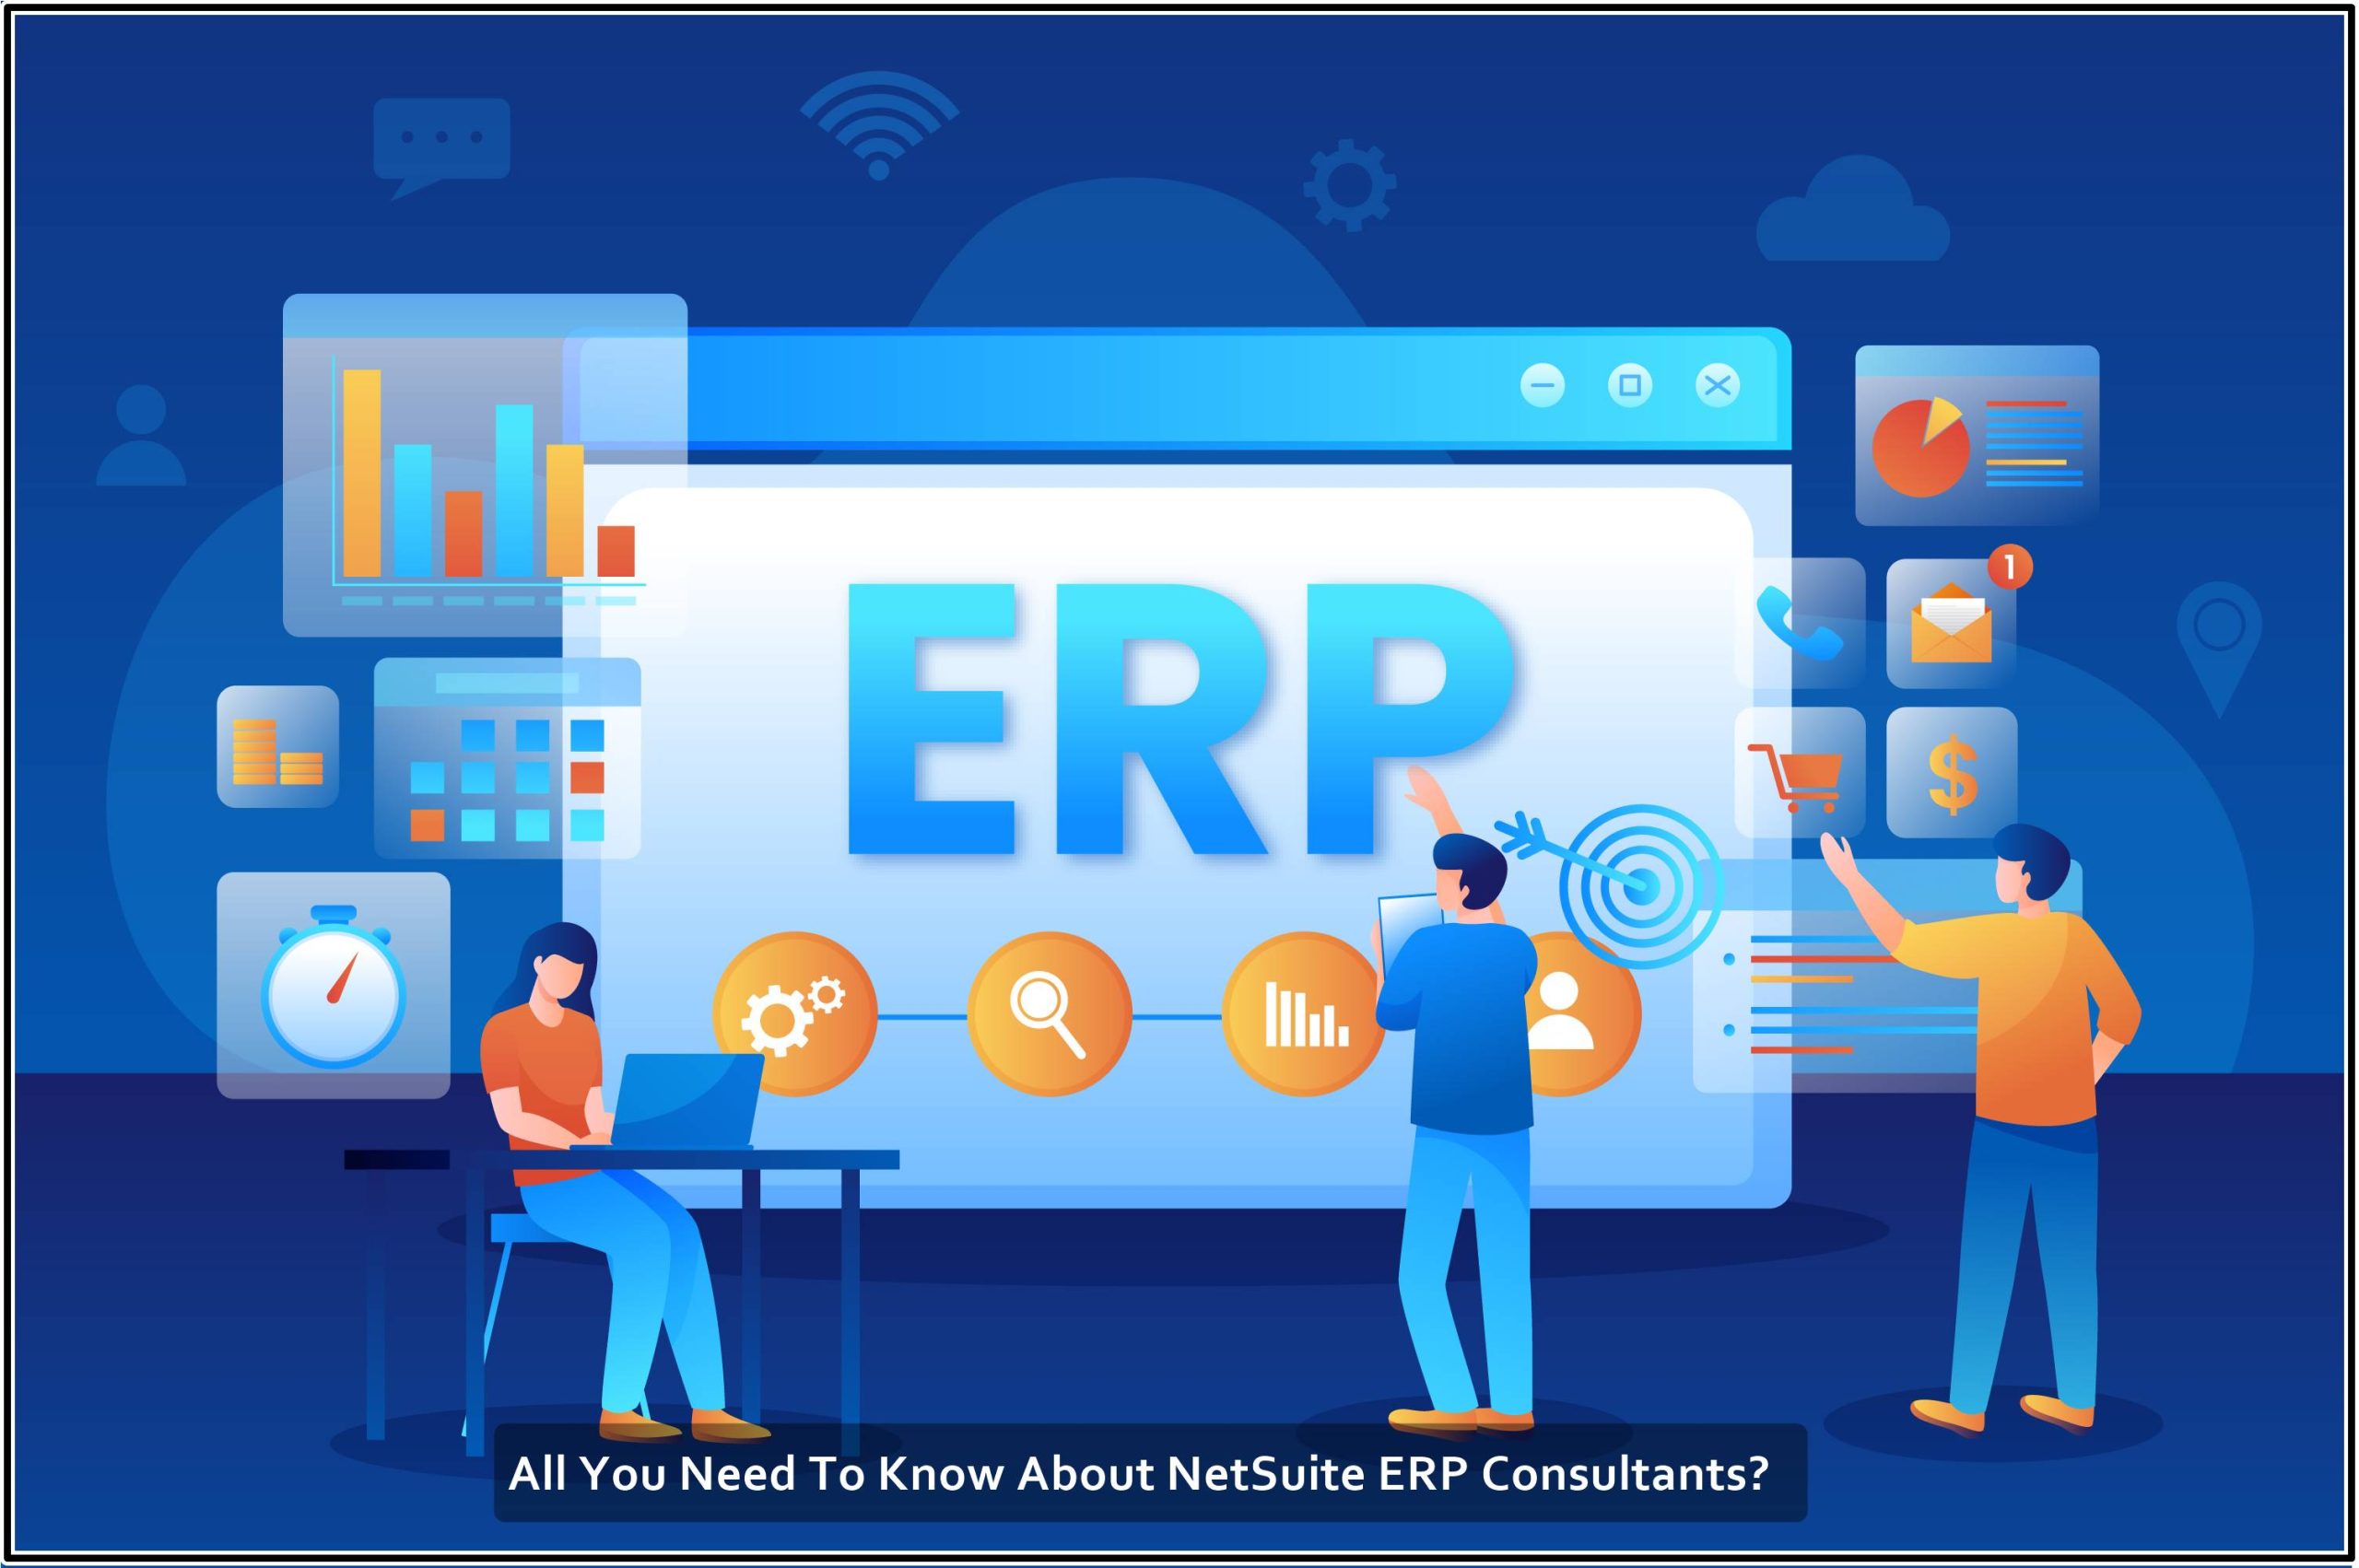 All You Need To Know About NetSuite ERP Consultants